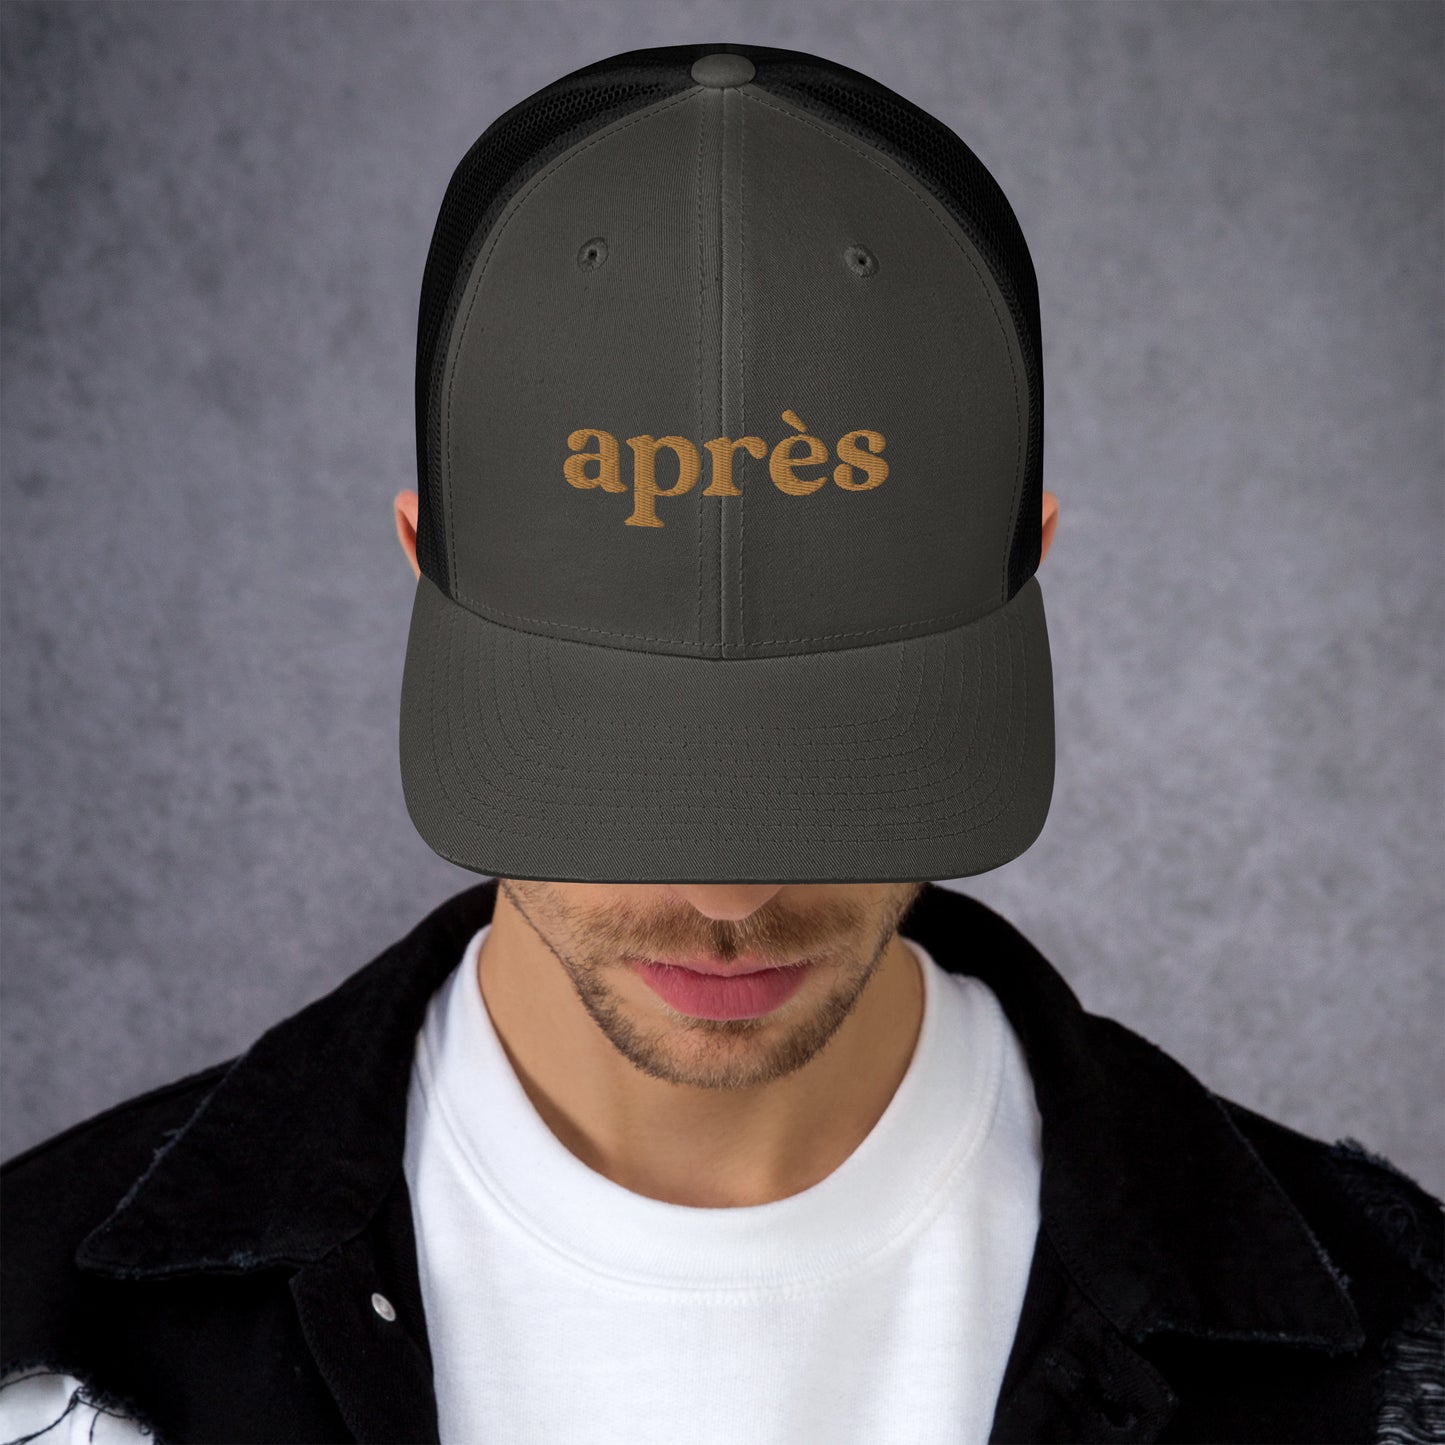 Apres Gold Embroidered Trucker Hat